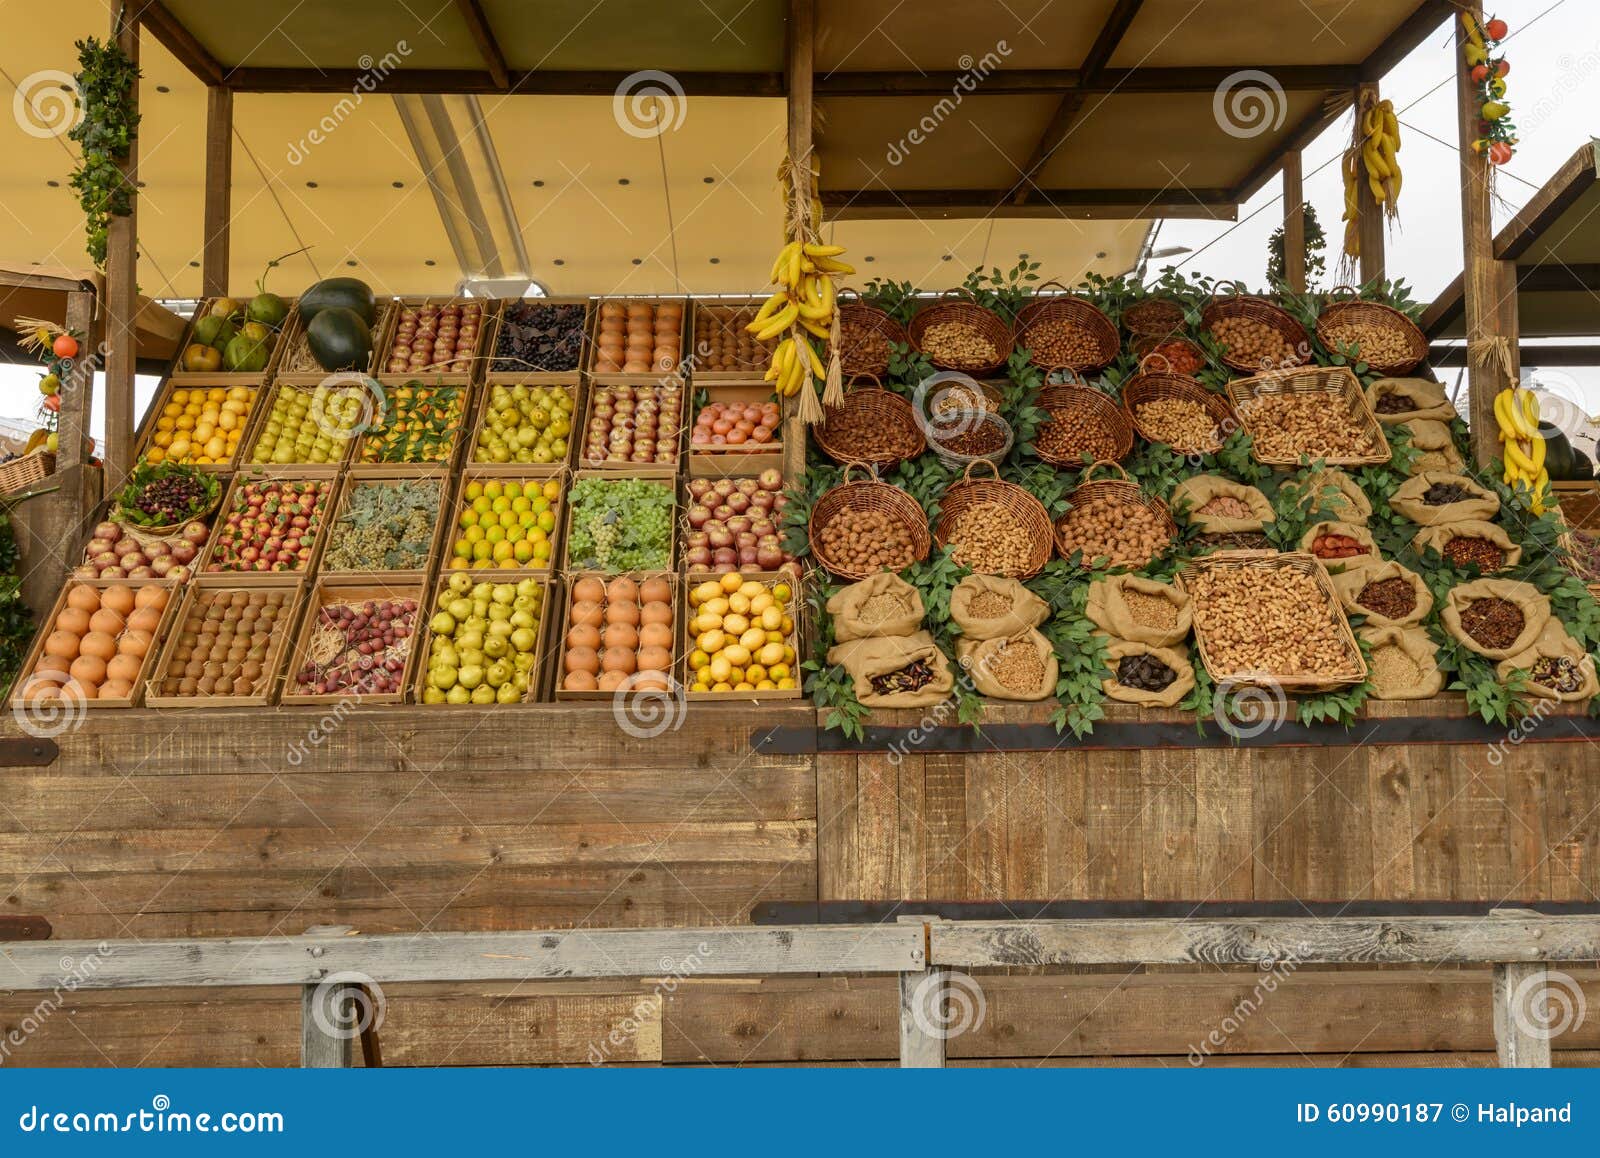 Download Food Mockup Stall Photos Free Royalty Free Stock Photos From Dreamstime